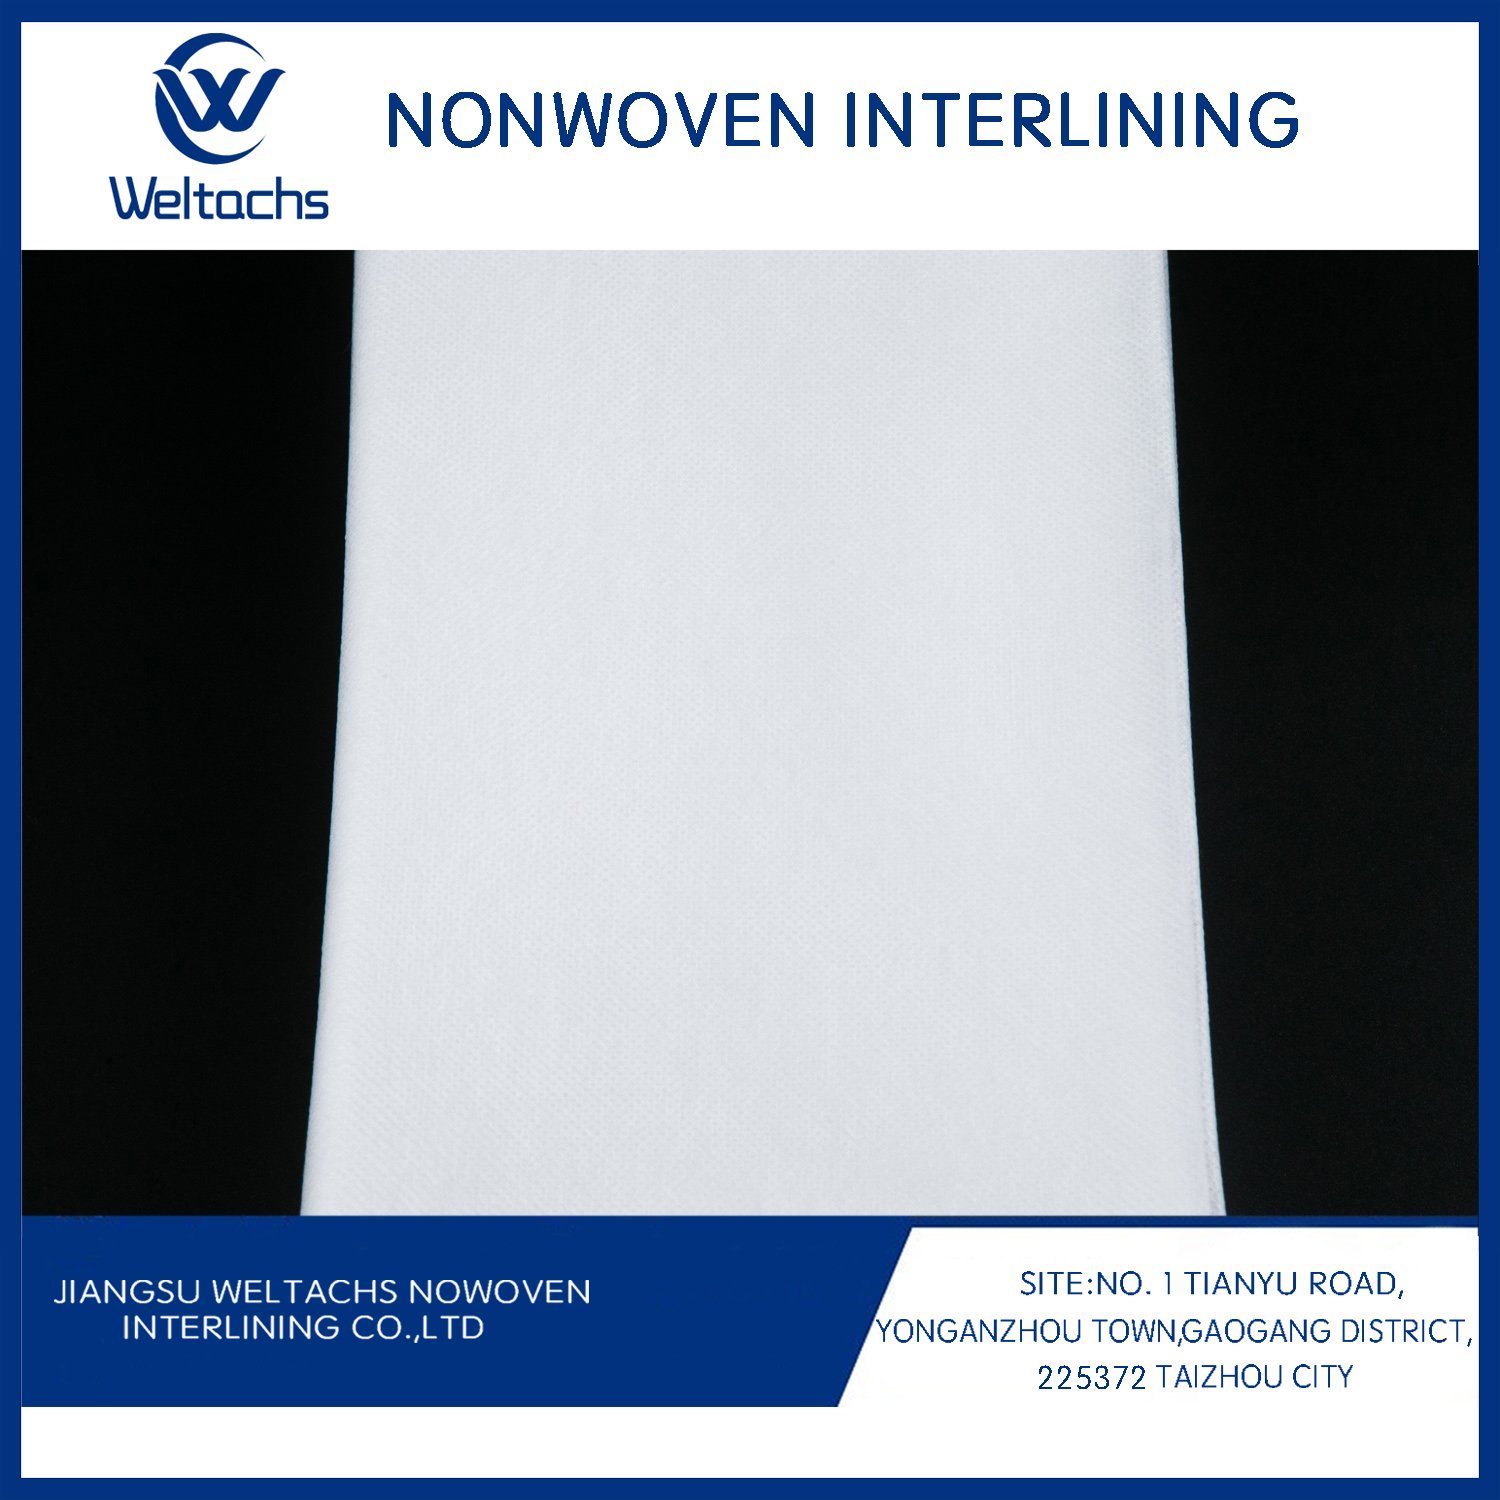 Nonwoven Gum Stay Embroidery Wendler Interlining 1025hf